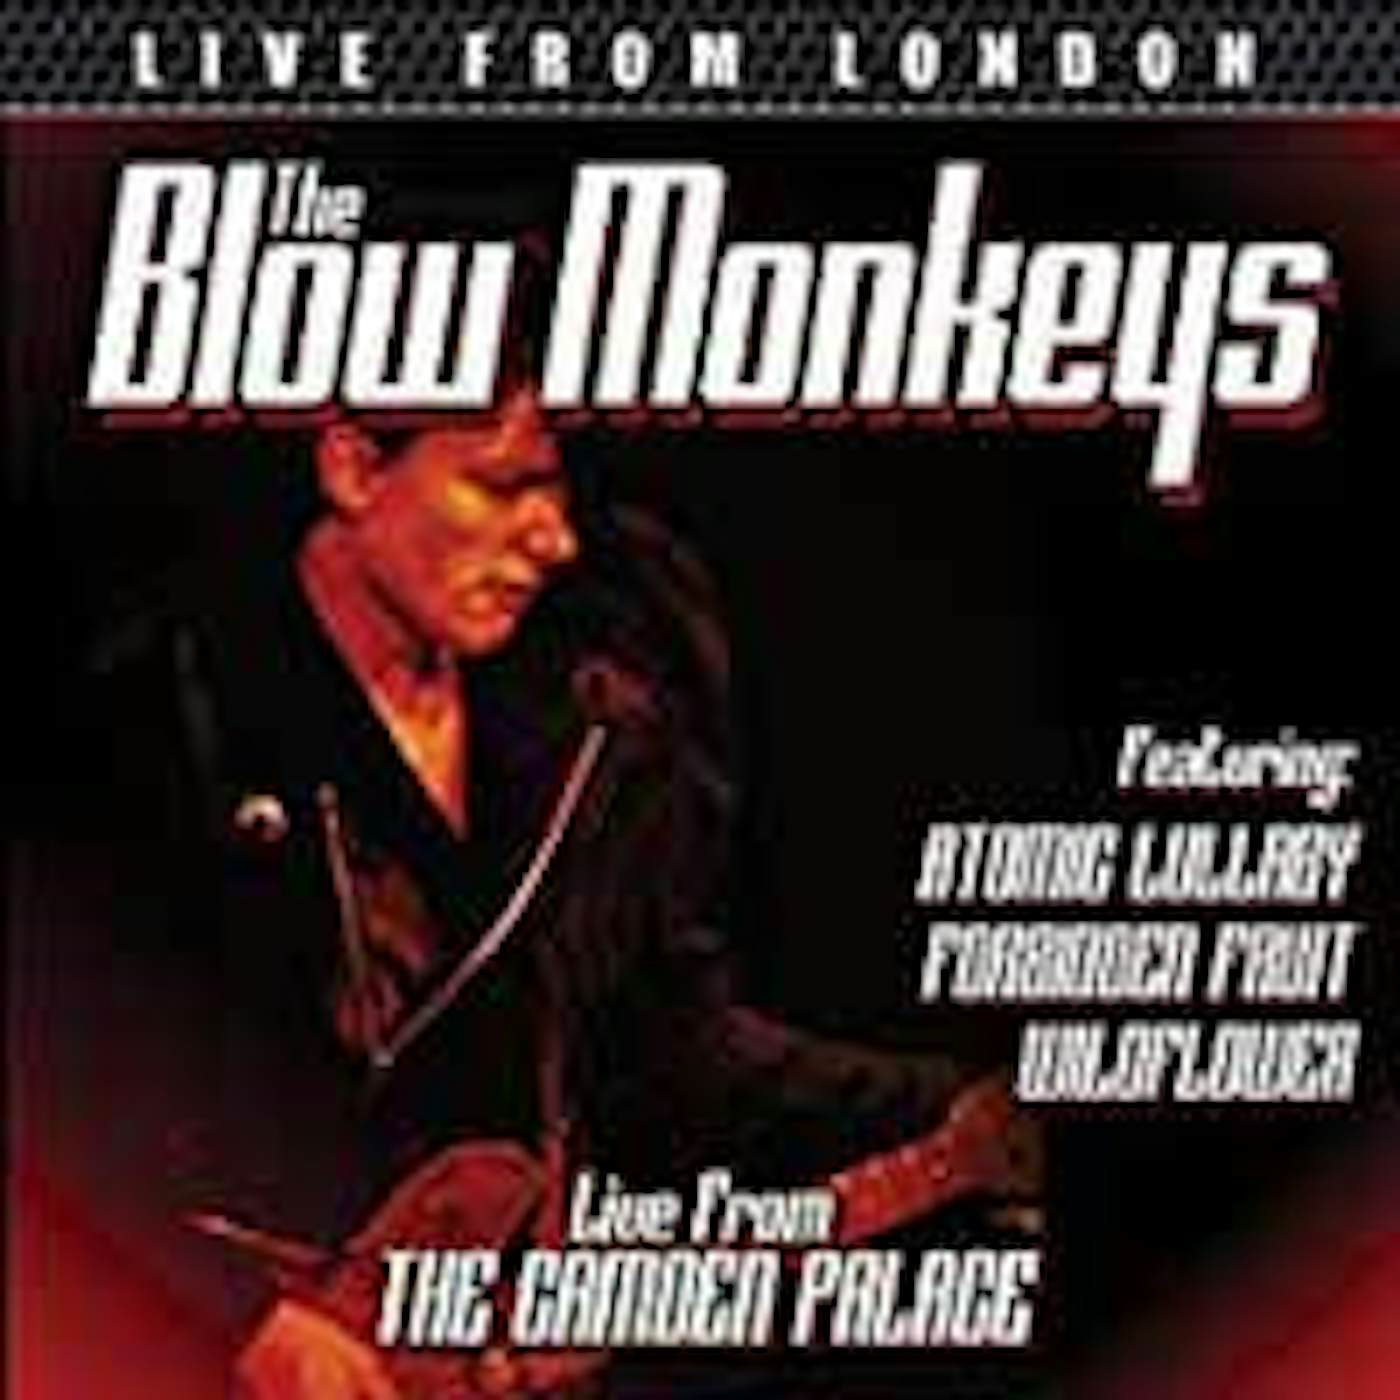 The Blow Monkeys DVD - Live From London